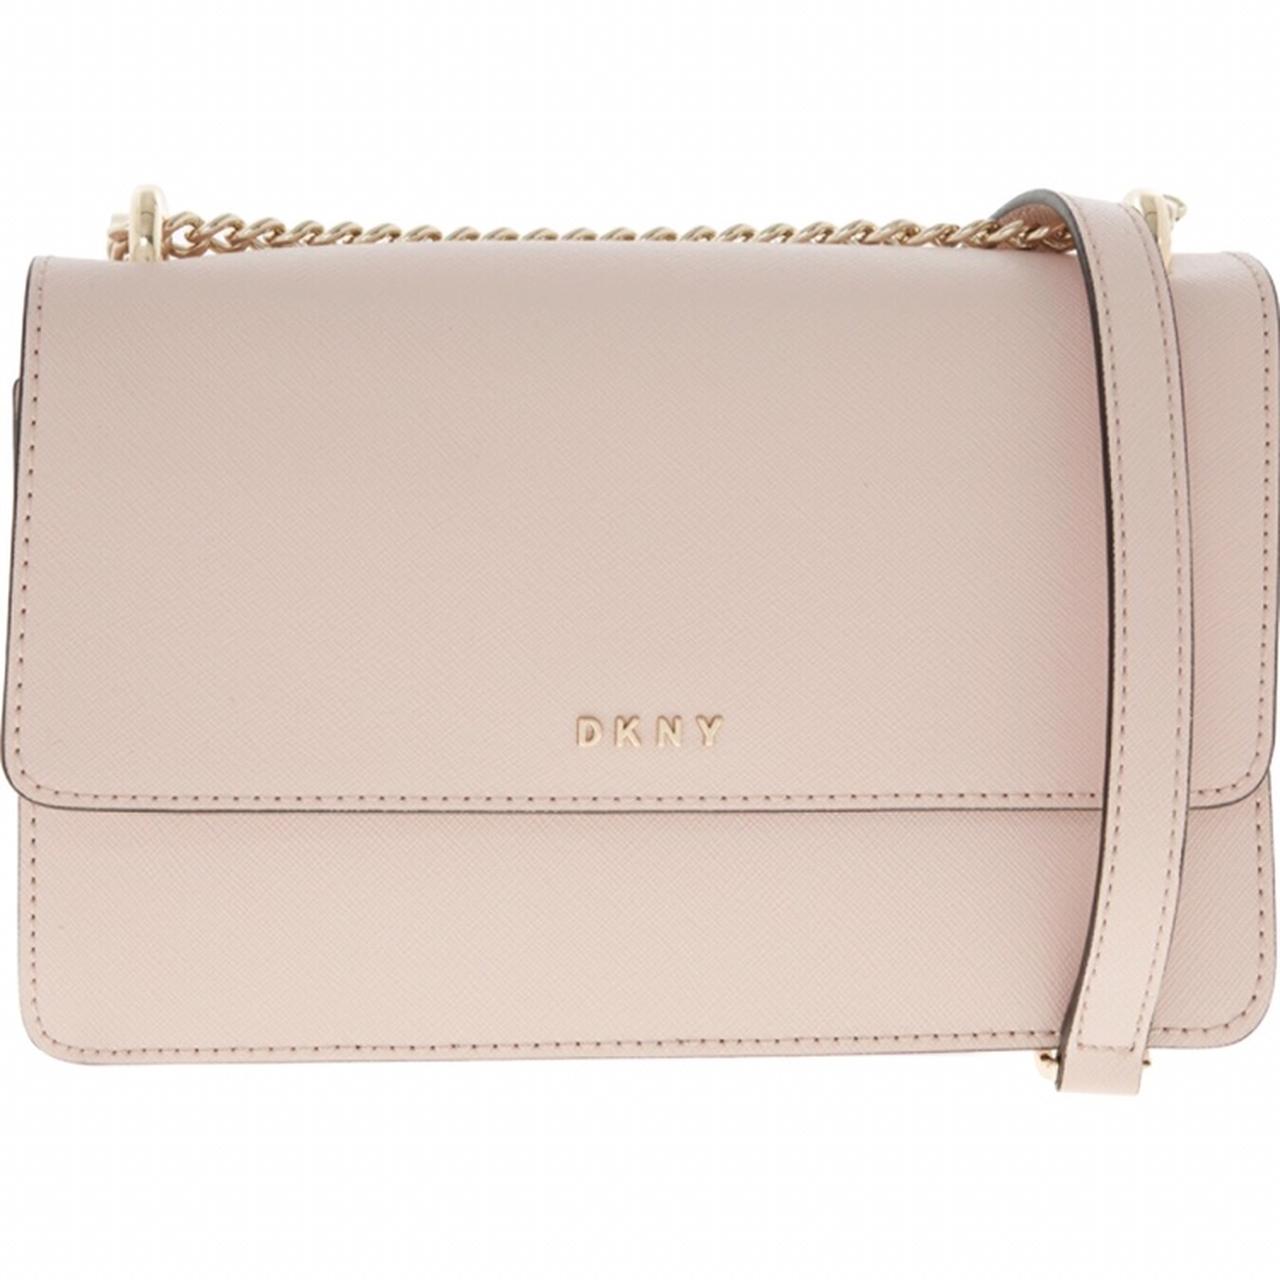 Dkny Bryant Small Chain Flap Bag - Pink